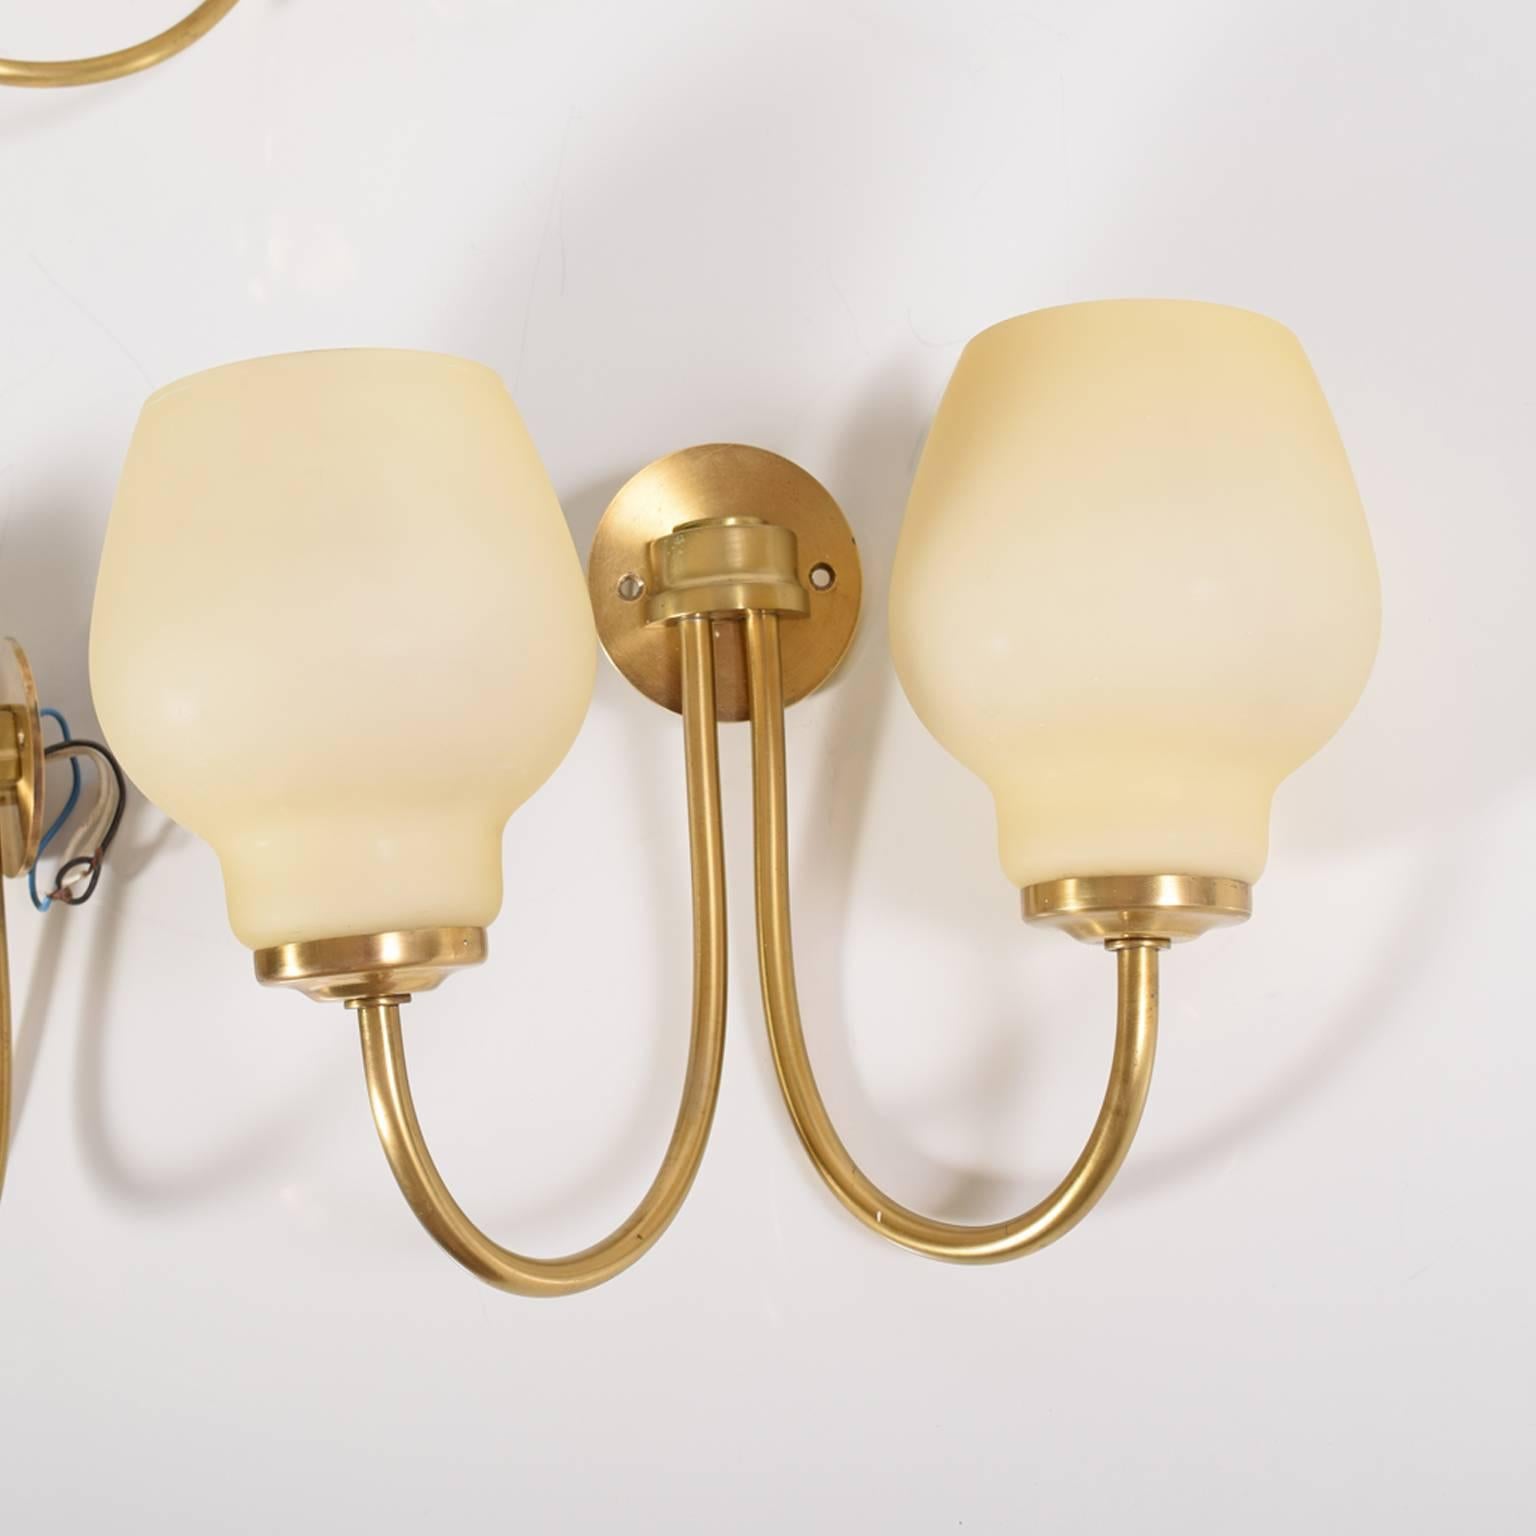 Four Wall Sconces Attributed to Vilhelm Lauritzen 1